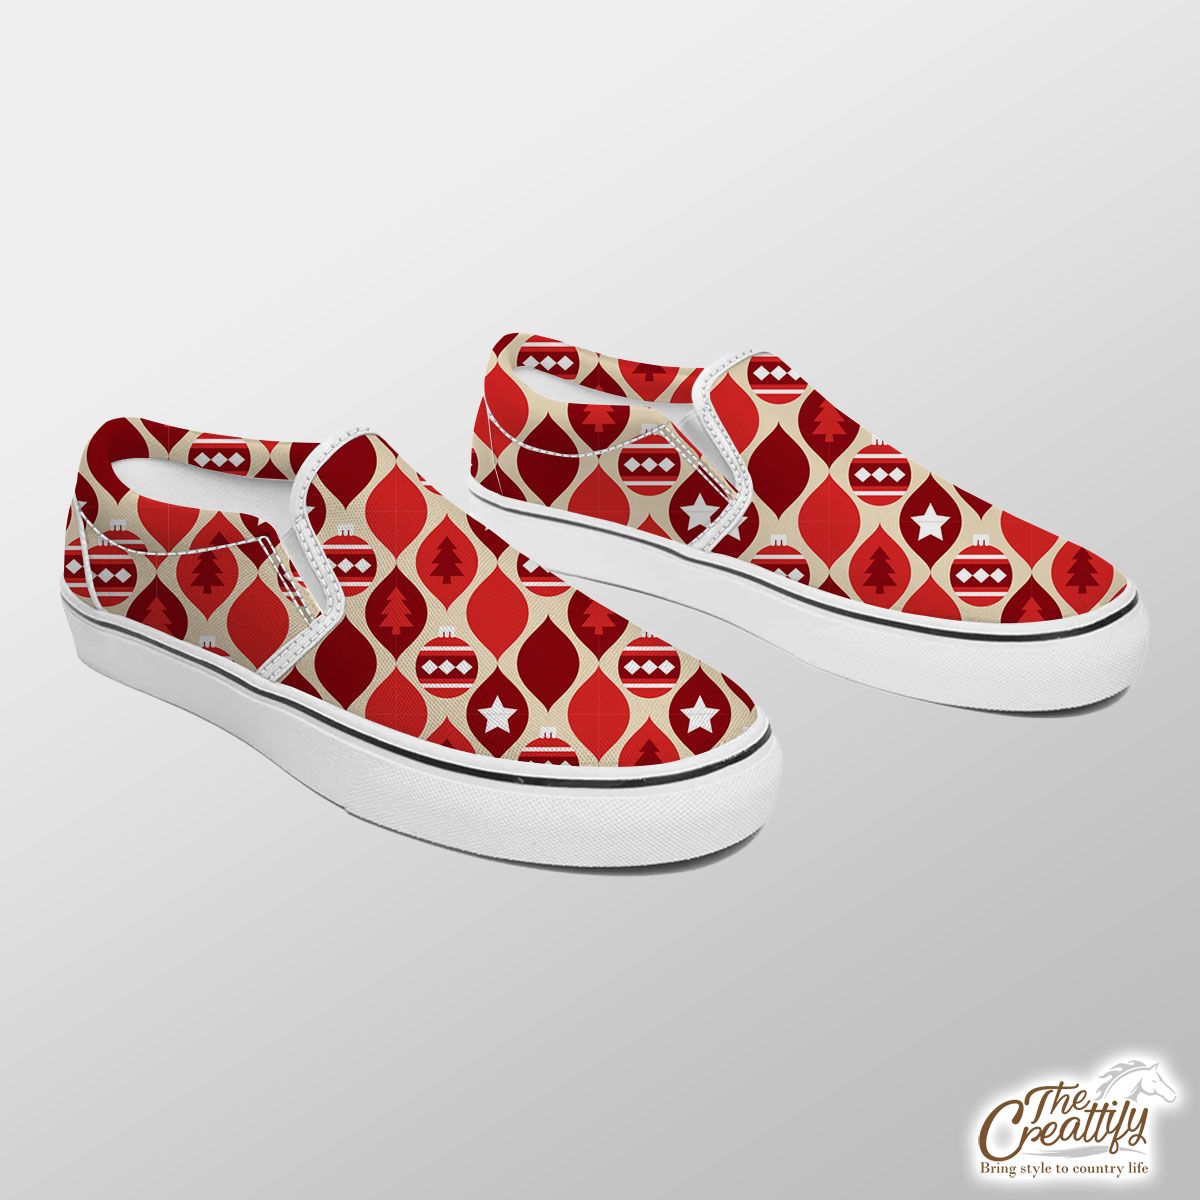 Christmas Balls With Pine Tree Silhouette Seamless Red Pattern Slip On Sneakers